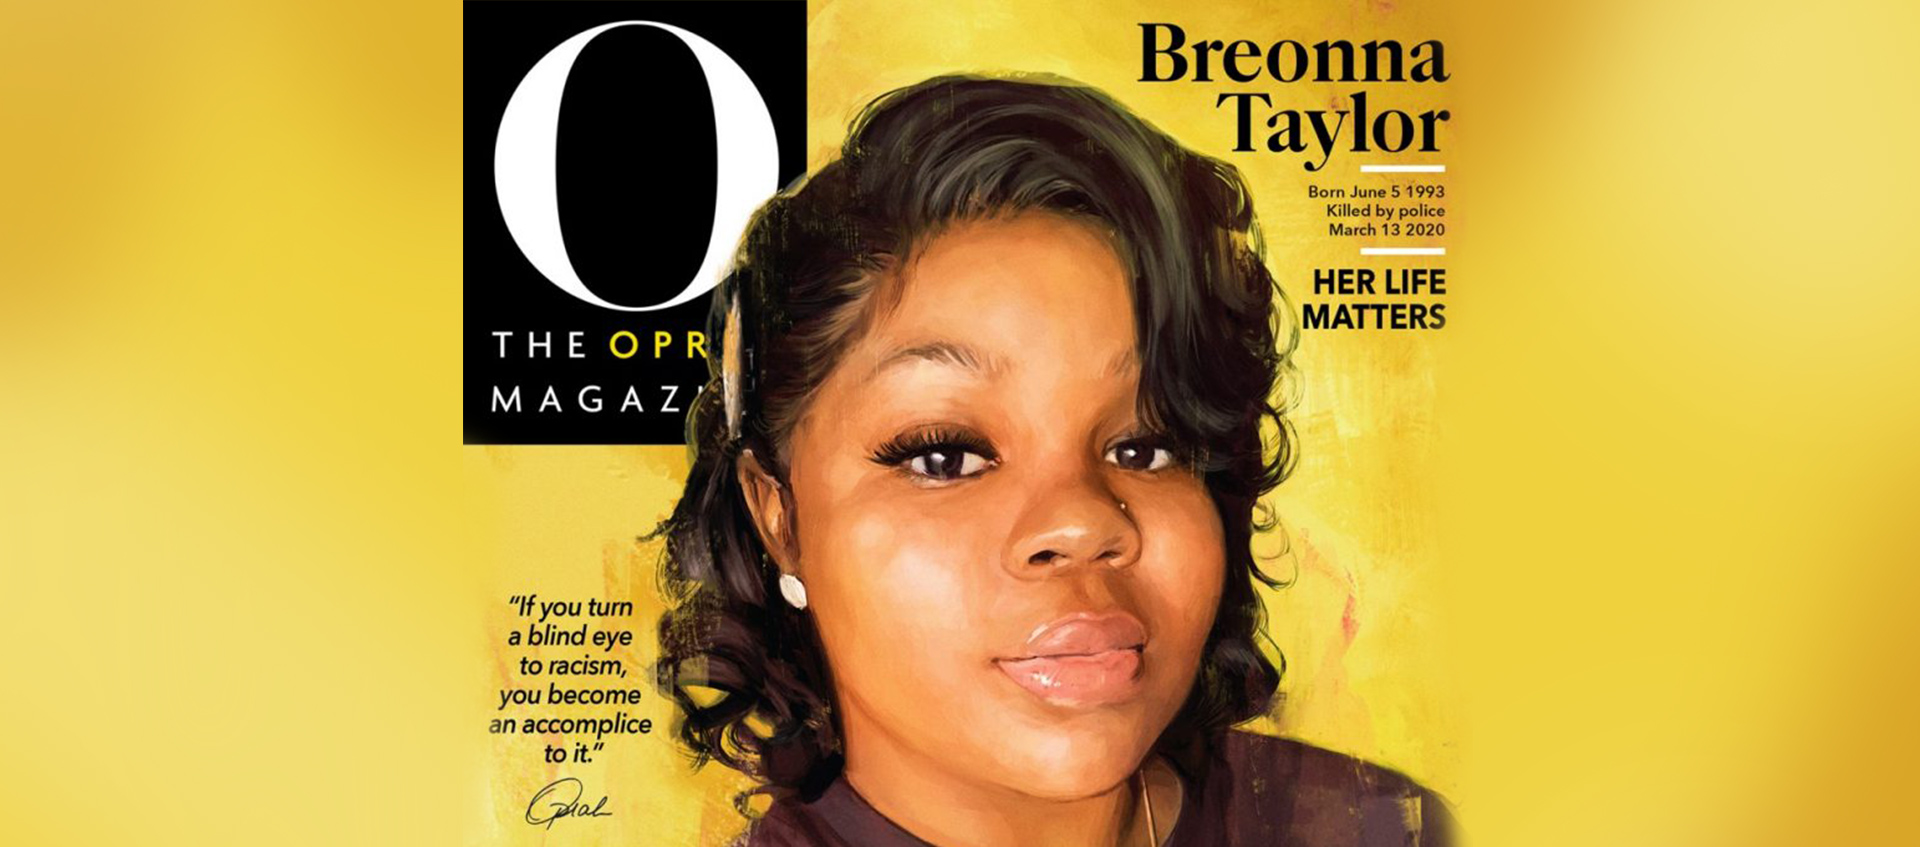 Cover of O Magazine with an image of Breonna Taylor